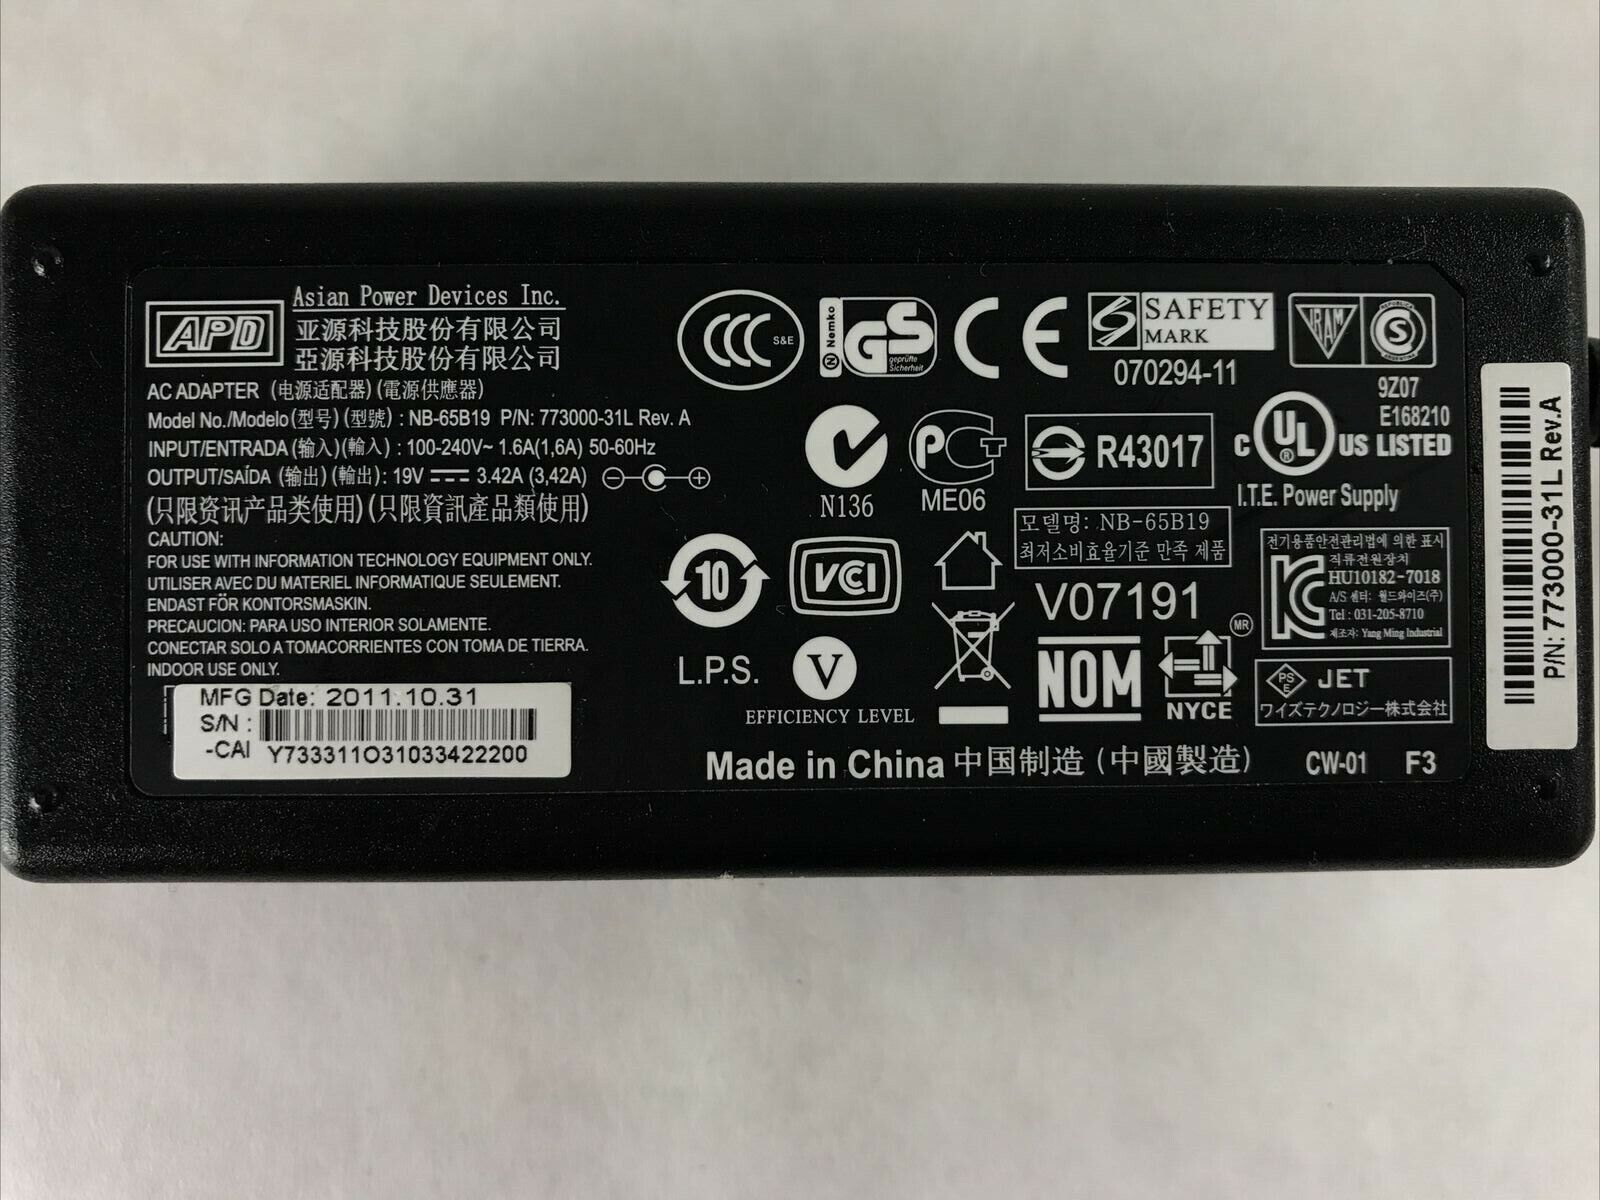 Dell APD Wyse 65W AC Adapter 773000-31L